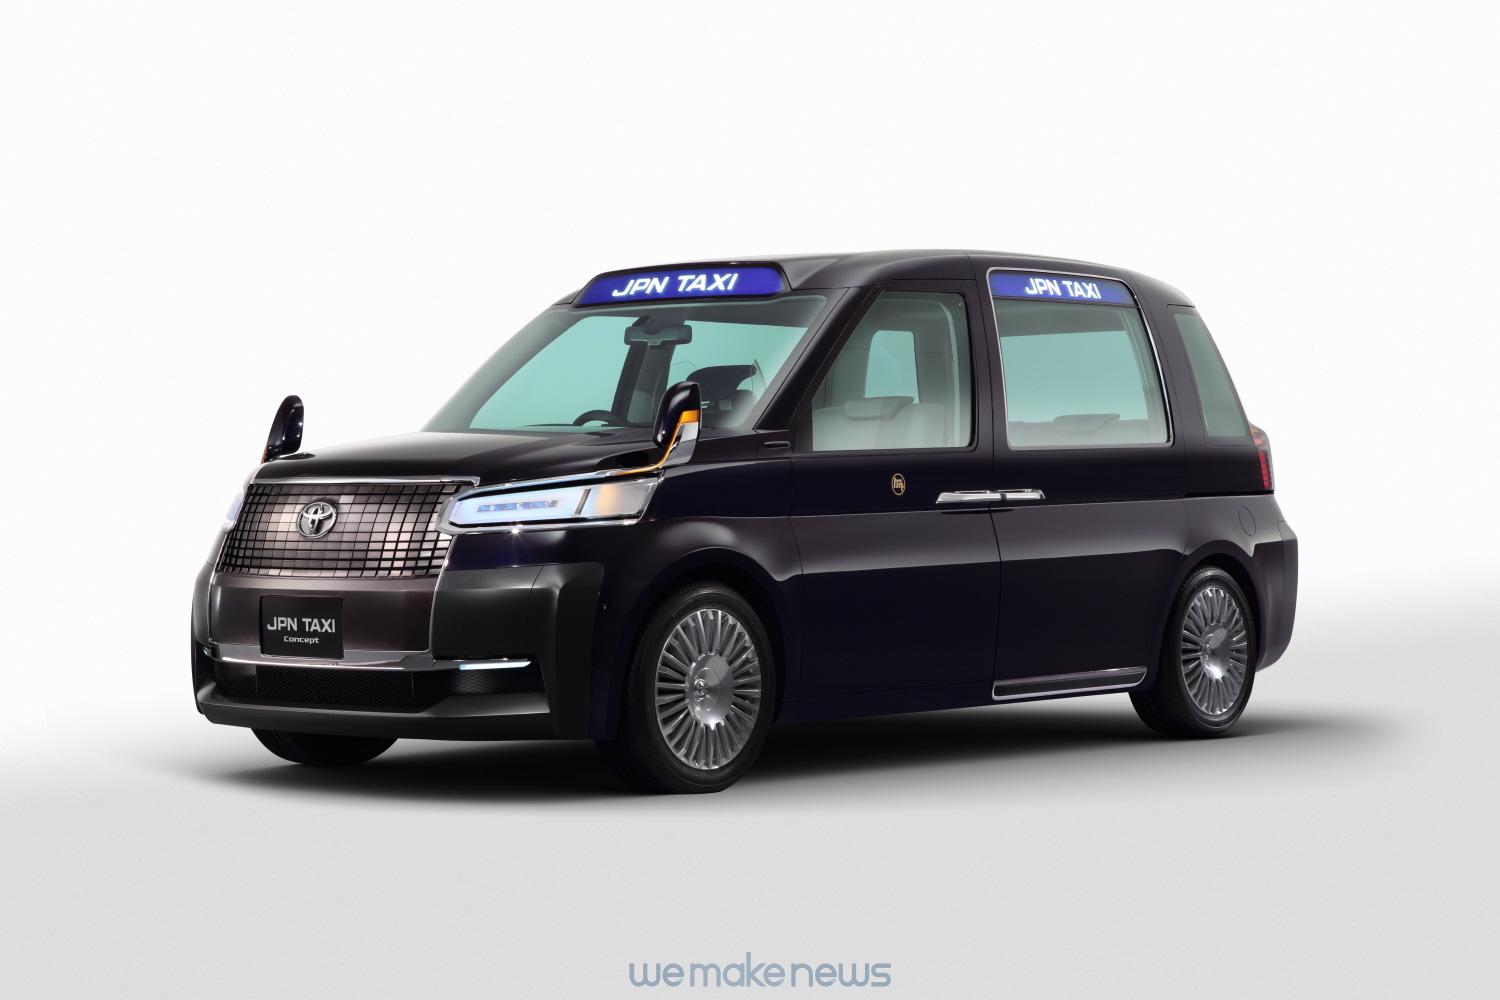 2013 TMS_Toyota Japan Taxi Concept.jpg